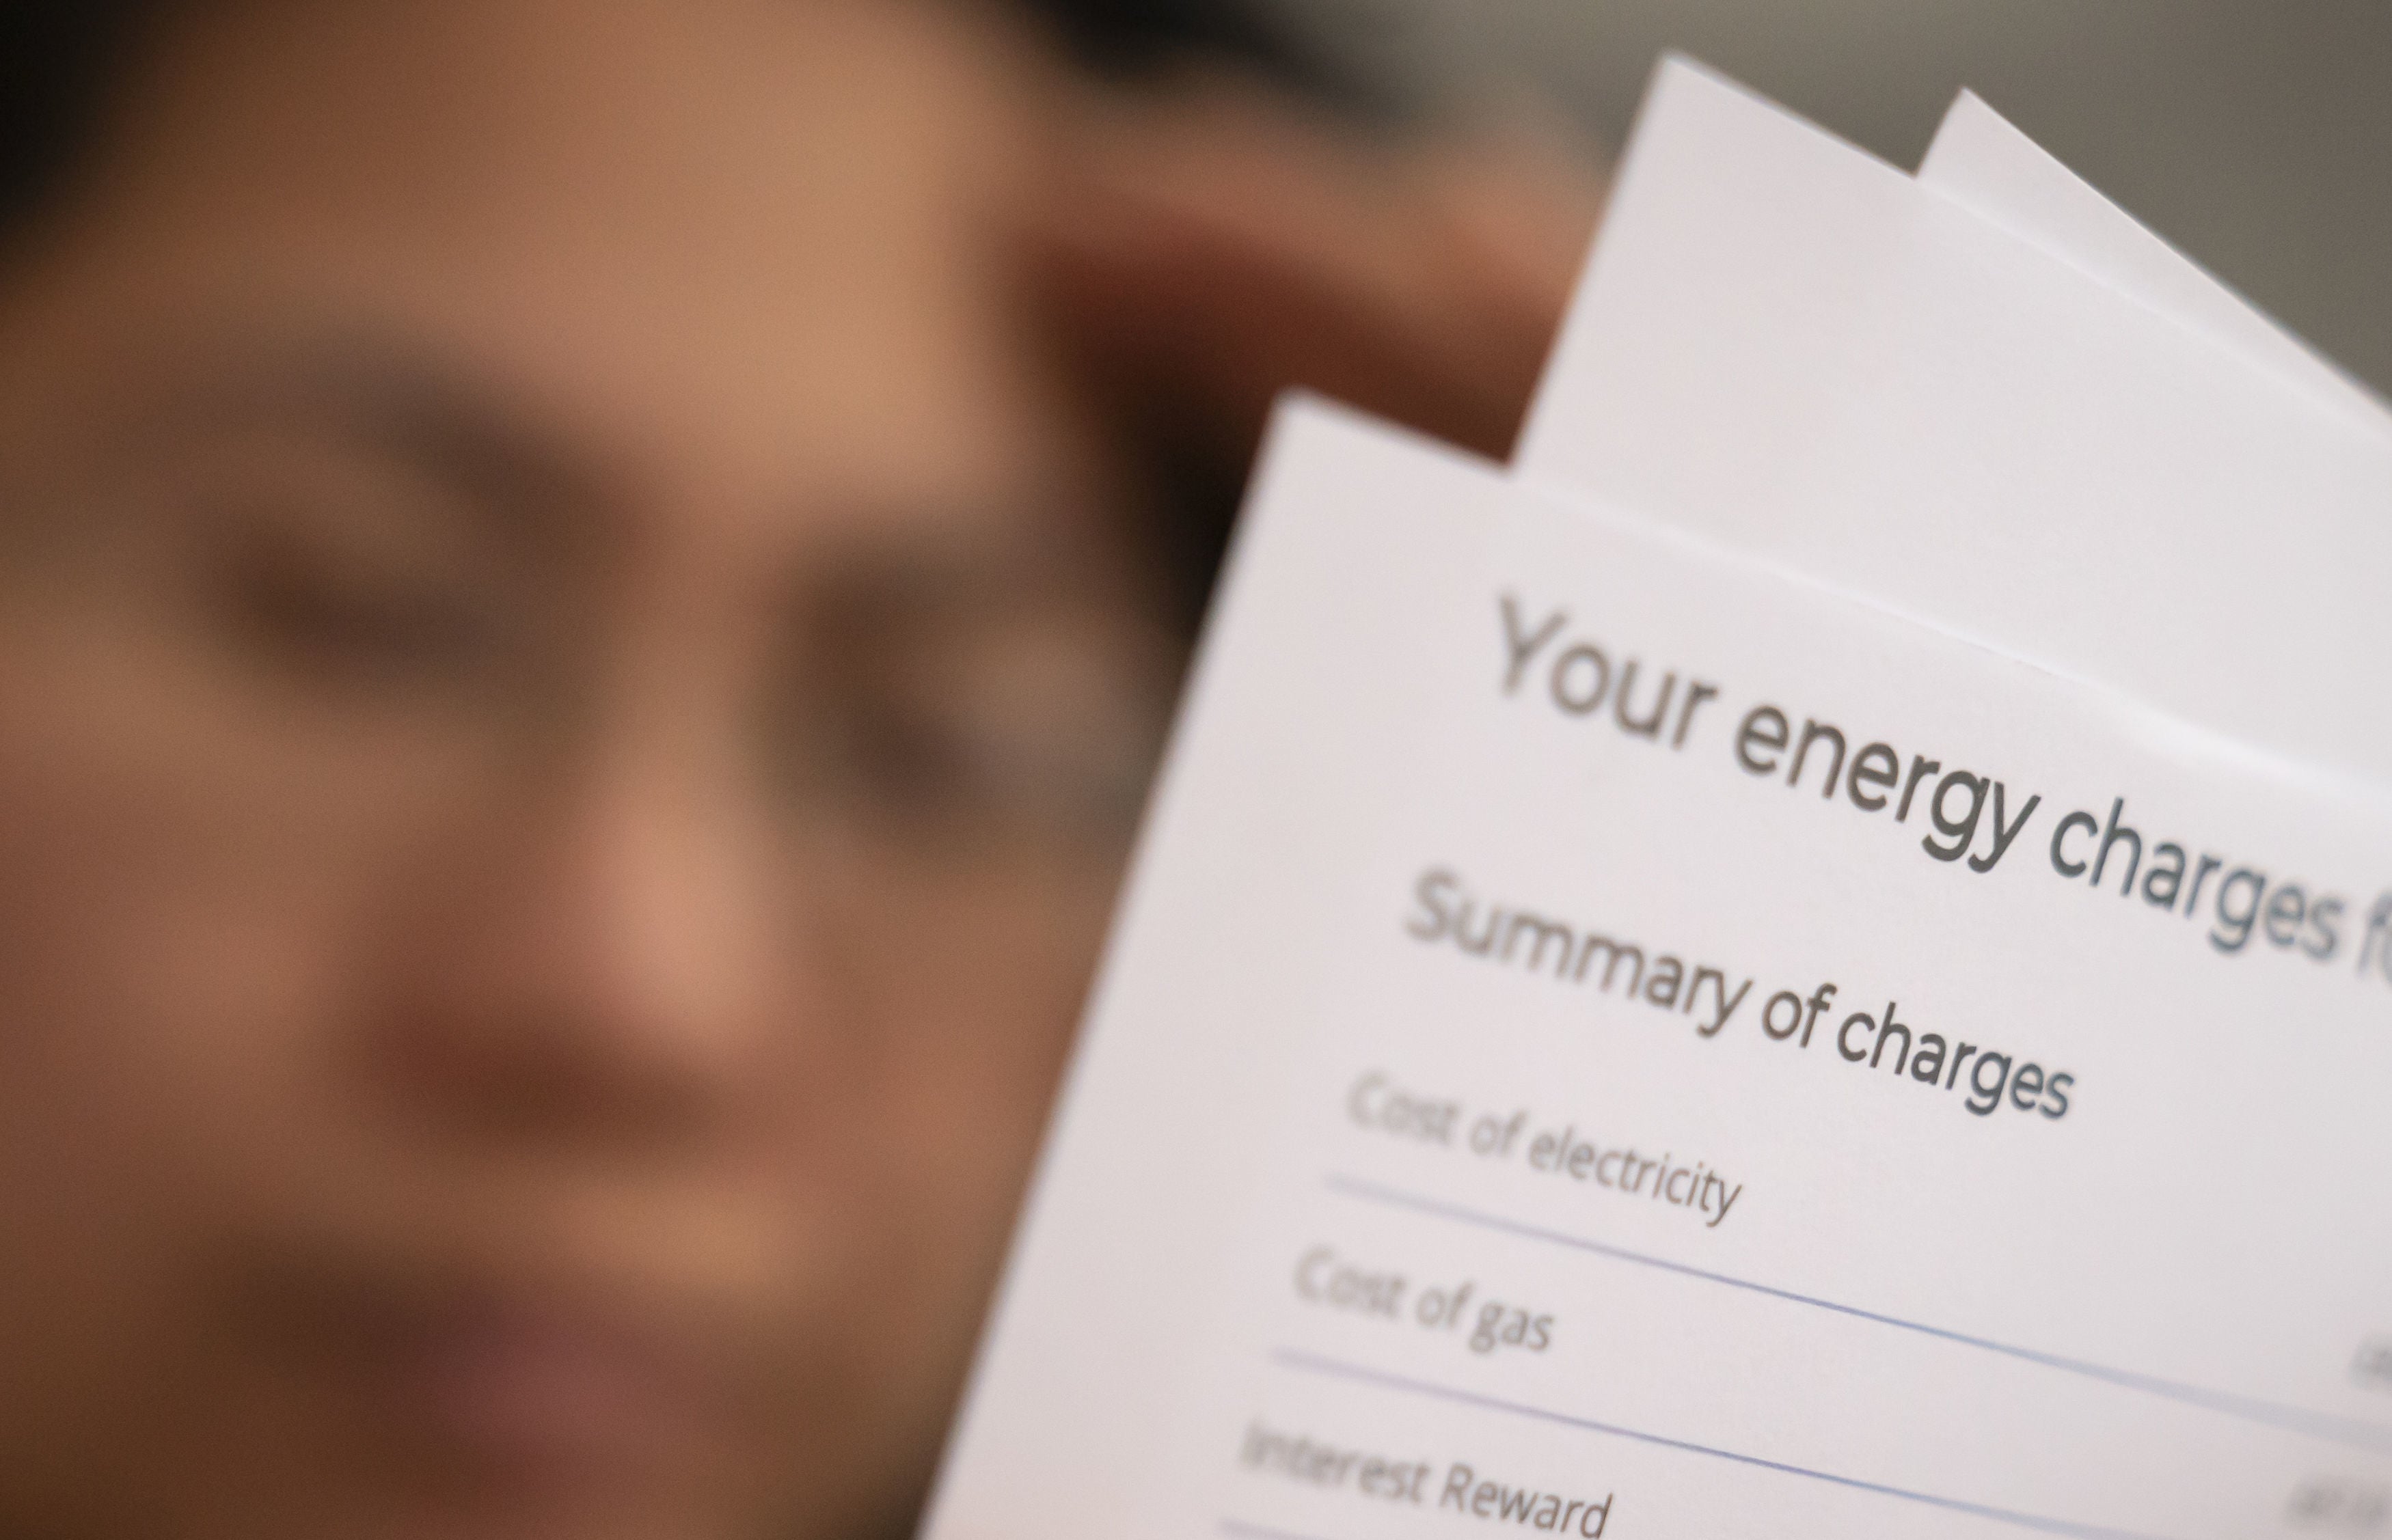 More than a fifth of people are worried about getting into energy debt this winter